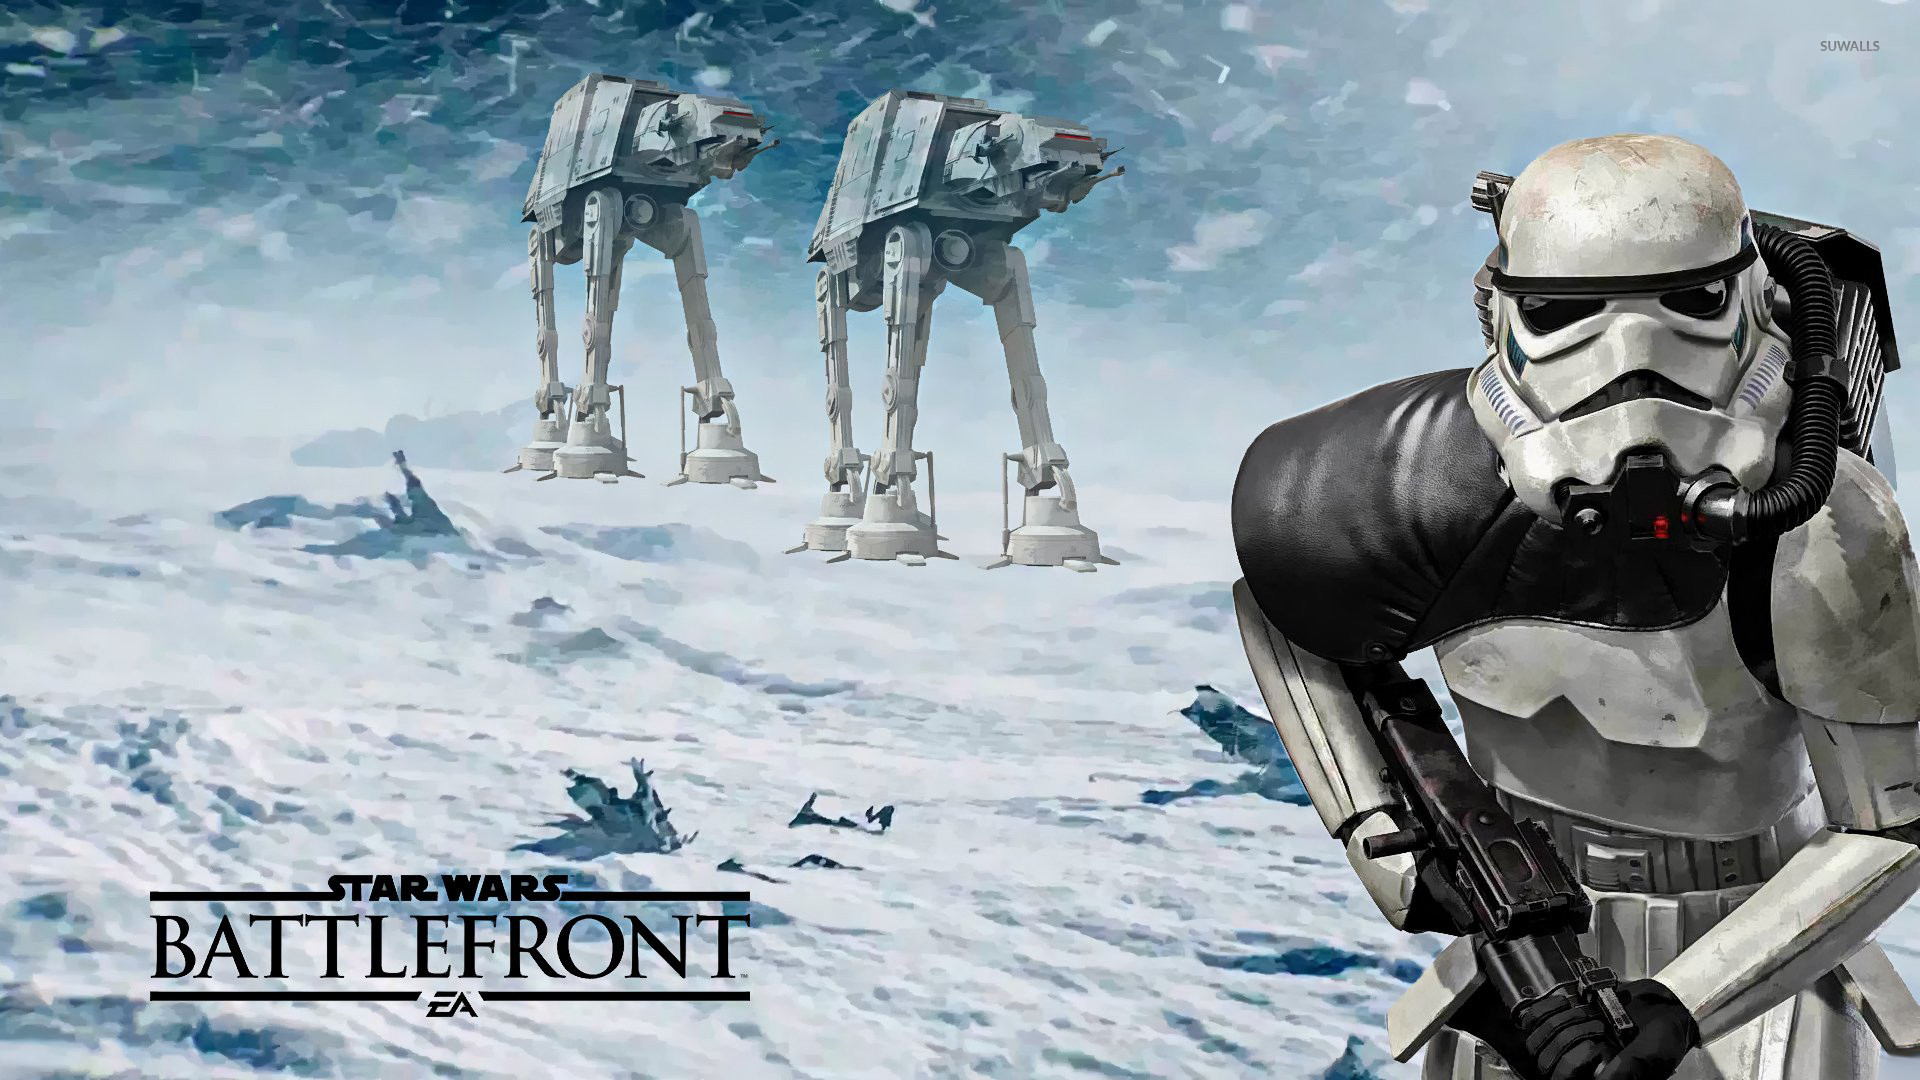 1920x1080 Stormtrooper and AT-ATs in Star Wars Battlefront wallpaper  jpg